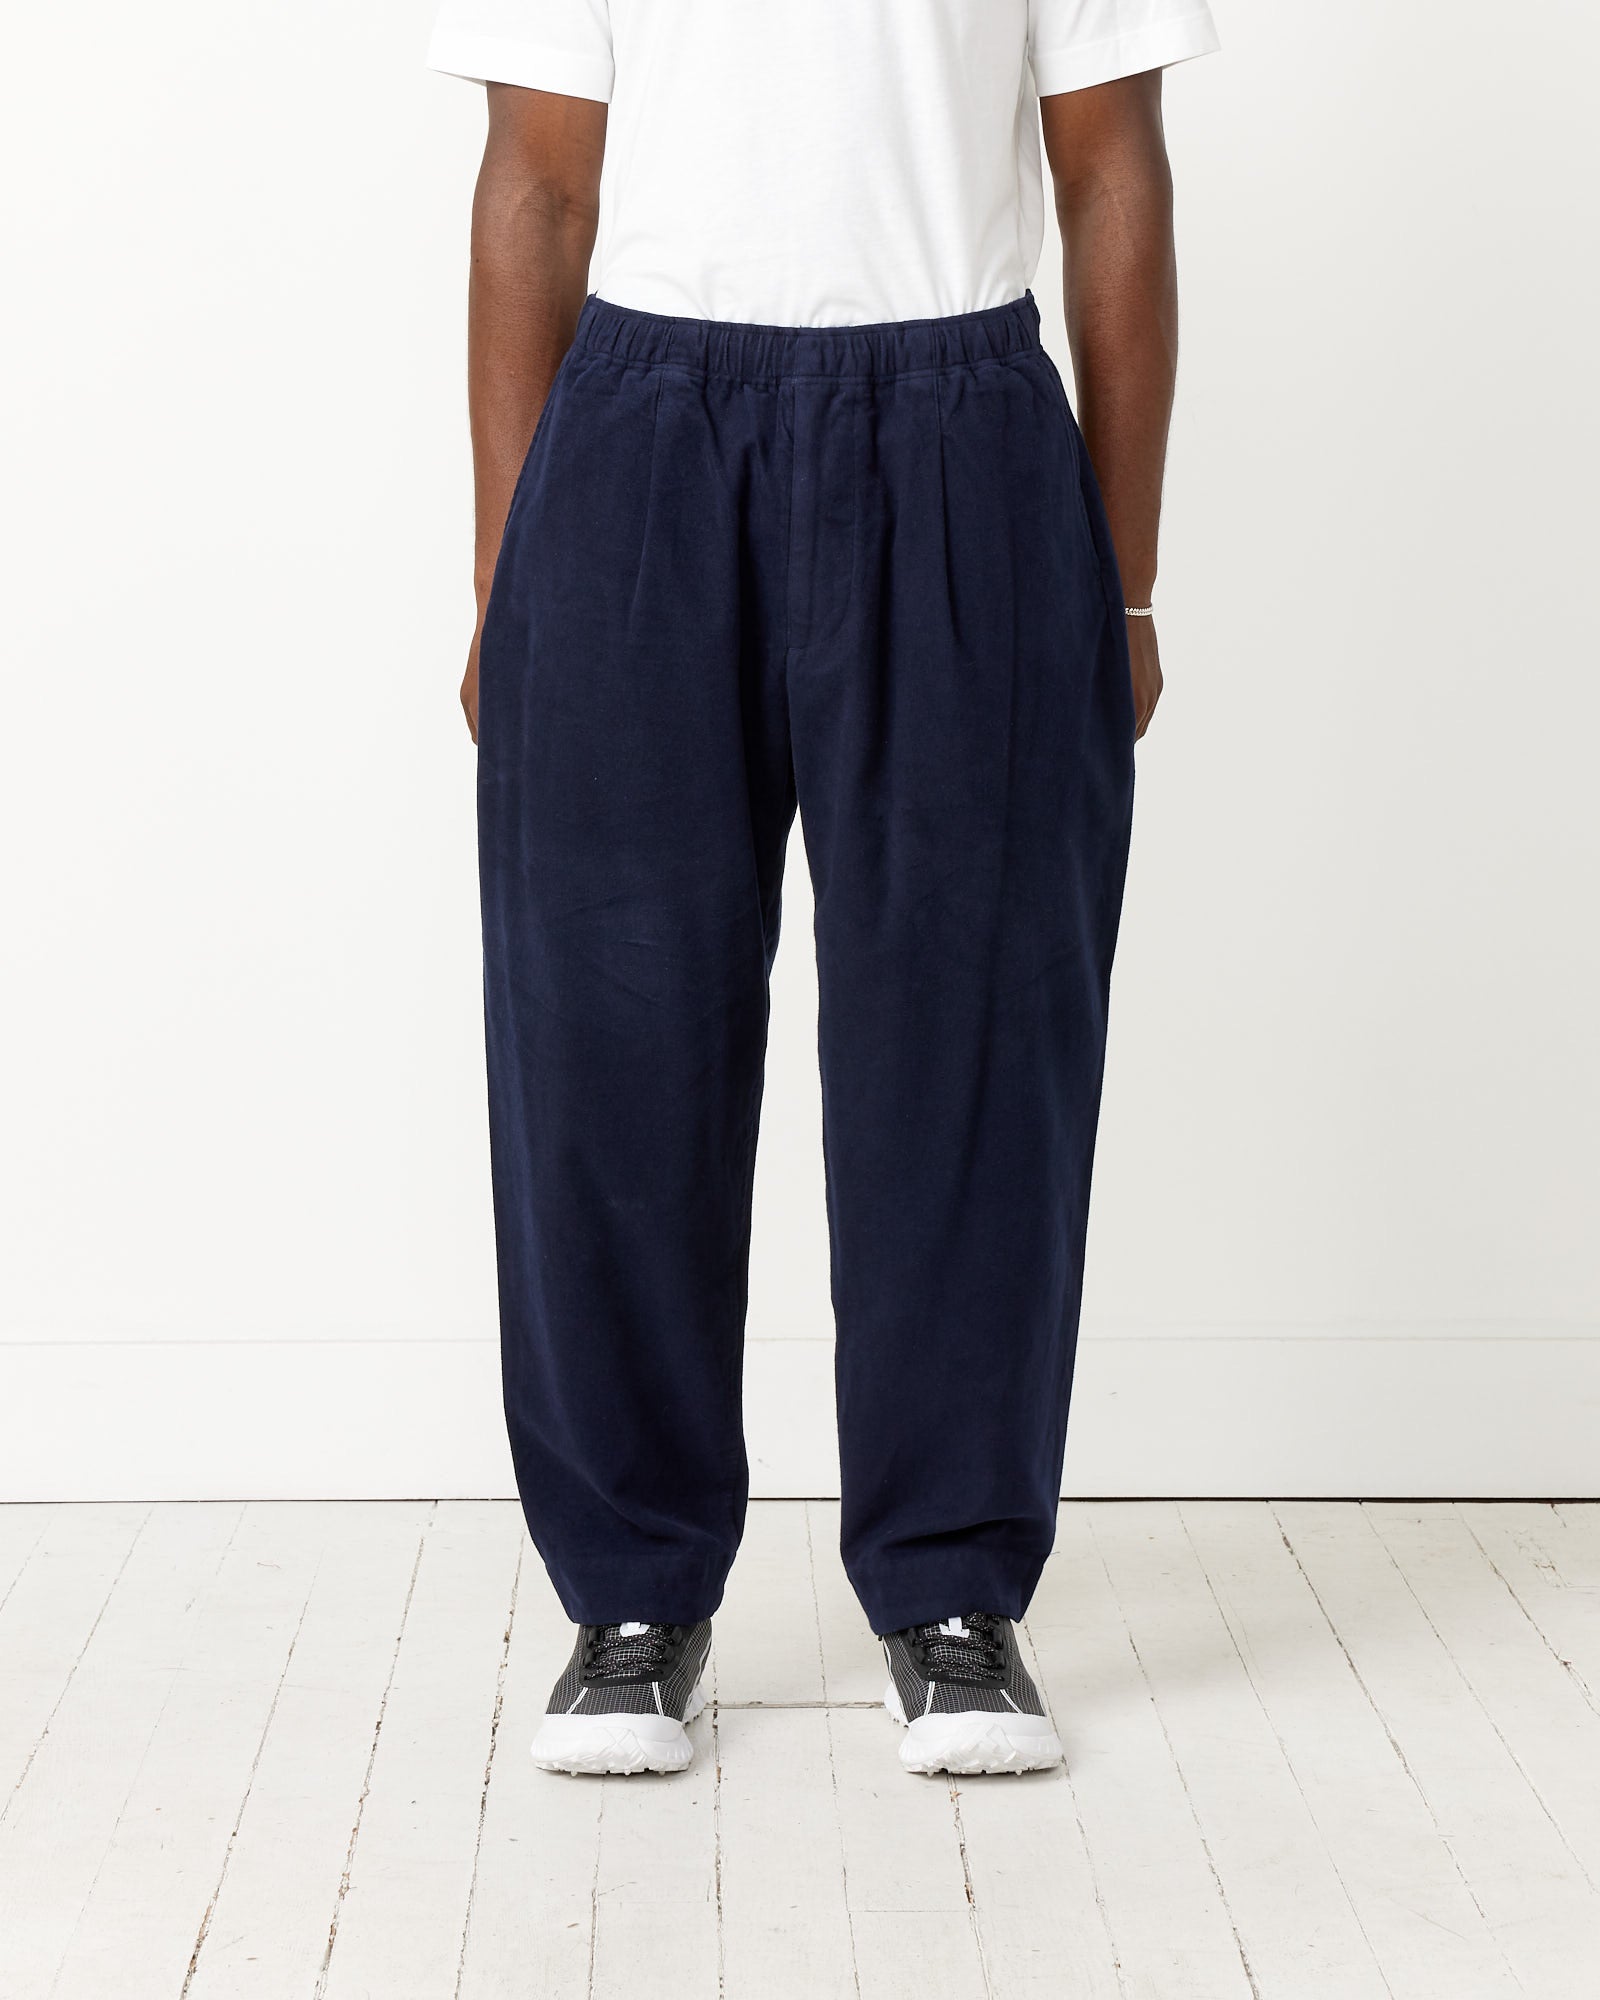 Flannel ODU Pant